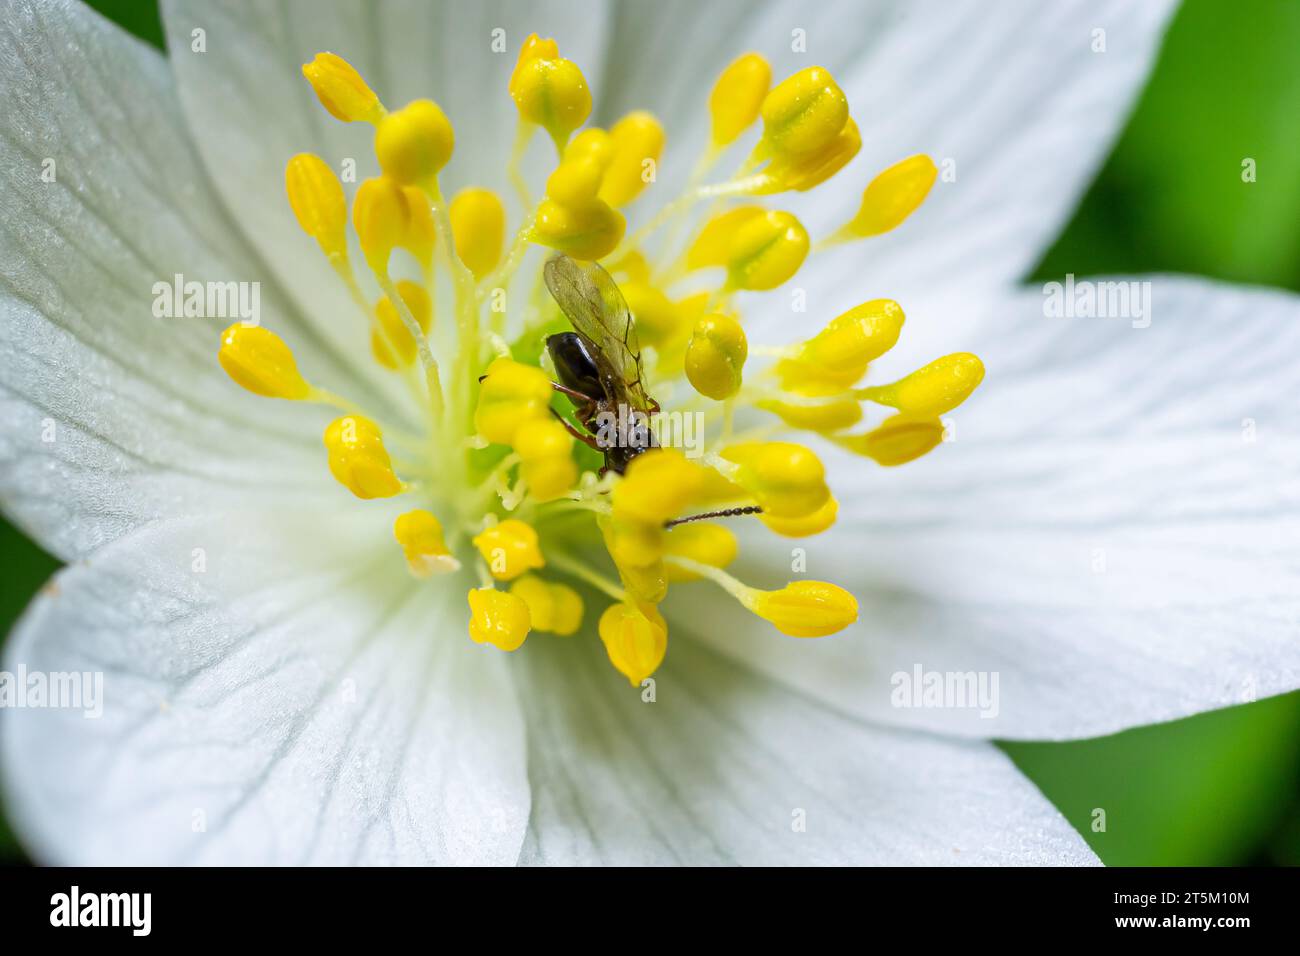 close up photo of hylaeus or bee on the White flower with green leaves in the garden. Stock Photo